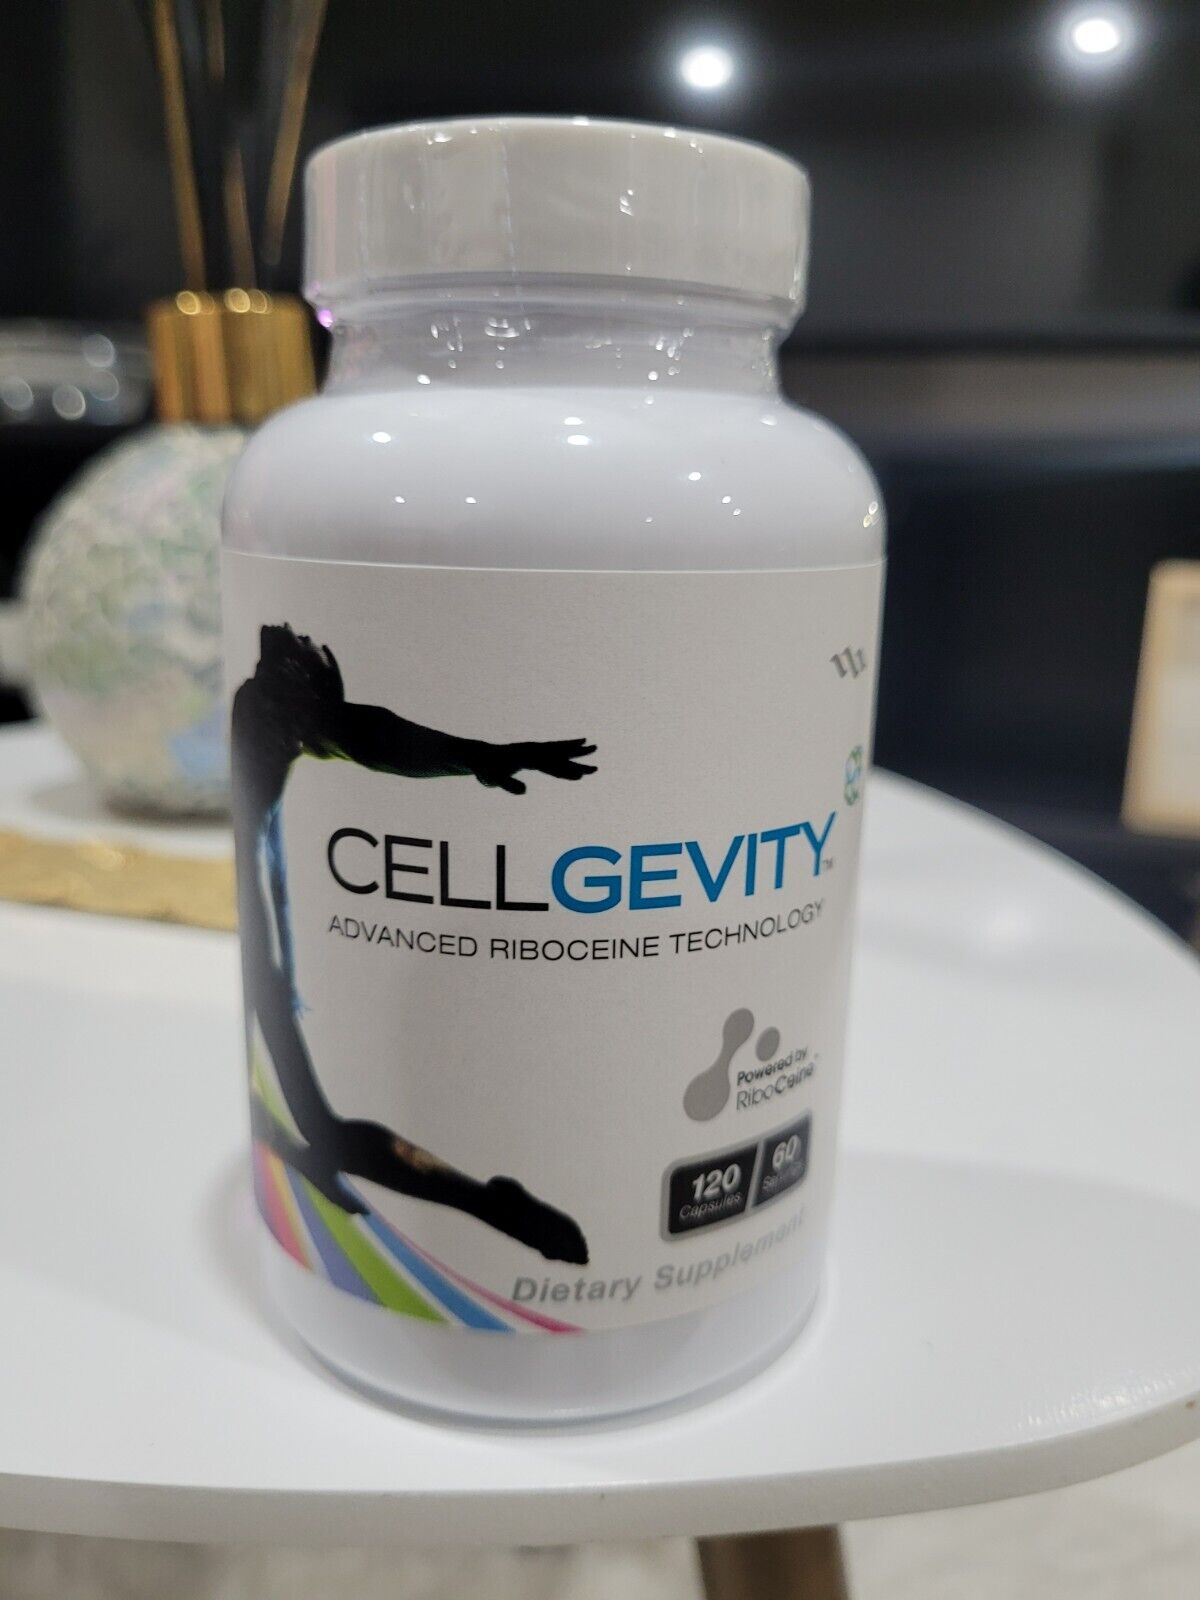 CellGevity Advanced Riboceine Technology 120 Capsules. Fast shipping.